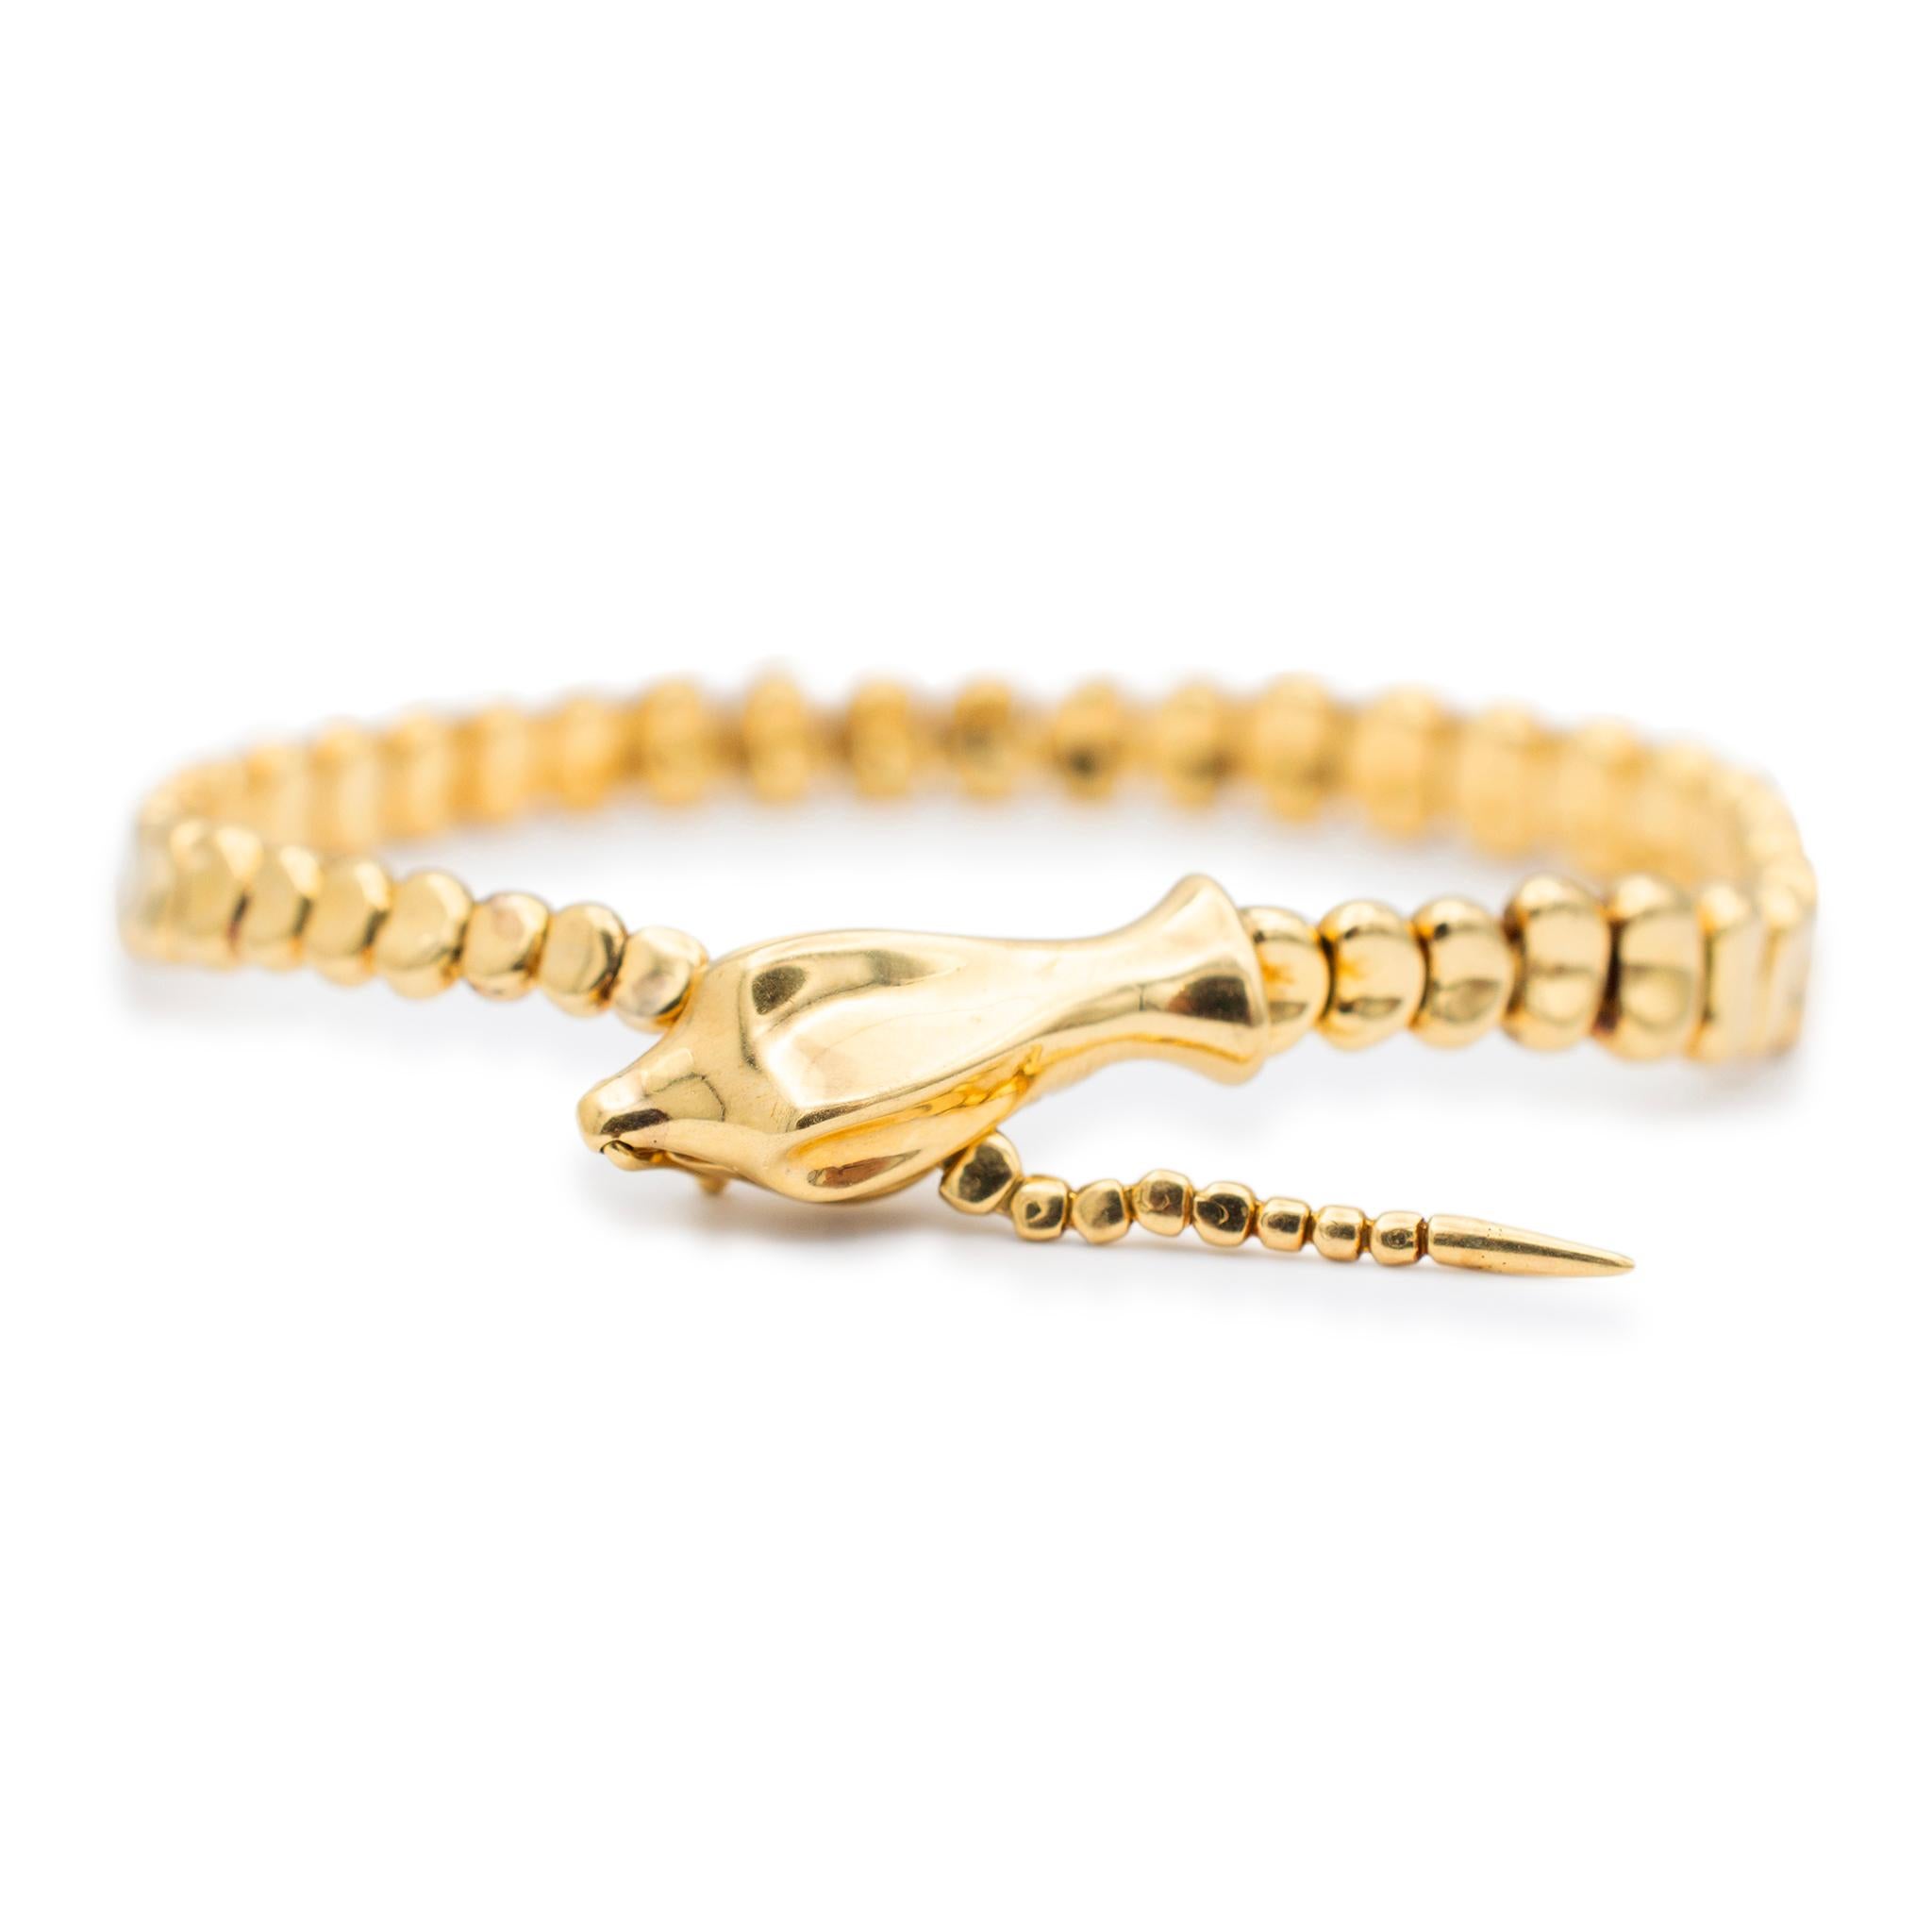 Brand: Tiffany & Co.

Metal Type: 18K Yellow Gold

Length: 8.00 inches

Width:  9.45 mm

Weight: 23.68 grams

Ladies 18K yellow gold, link bracelet.  Engraved with 